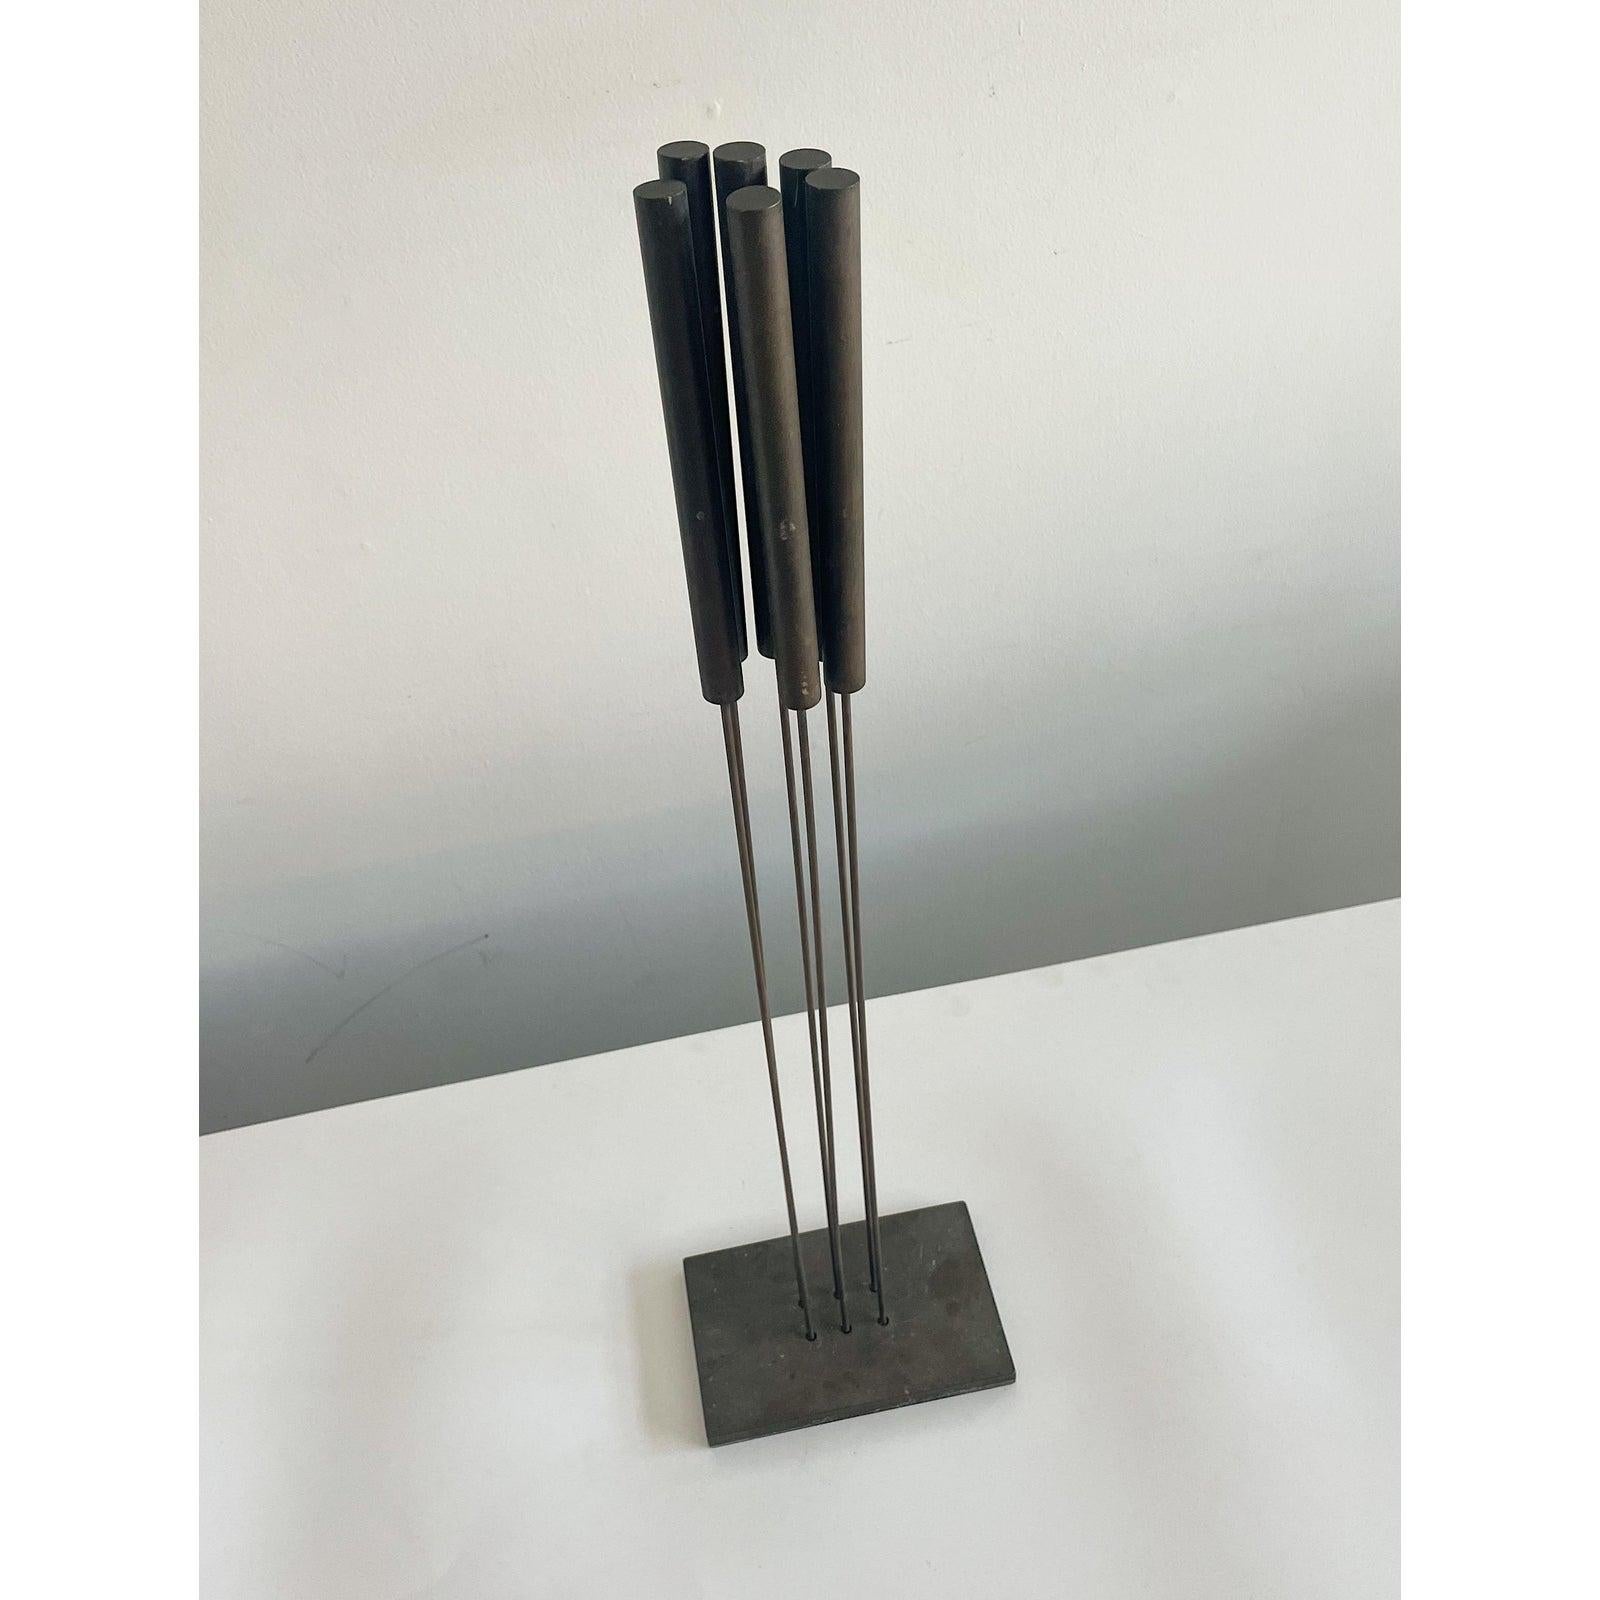 A bronze sonambient floor sculpture done in the style of Harry Bertoia with interactive rods that make a deep resounding chiming sound. signed on base W B 96

Born in Germany, Brueggemann earned degrees in mechanical applied physics and